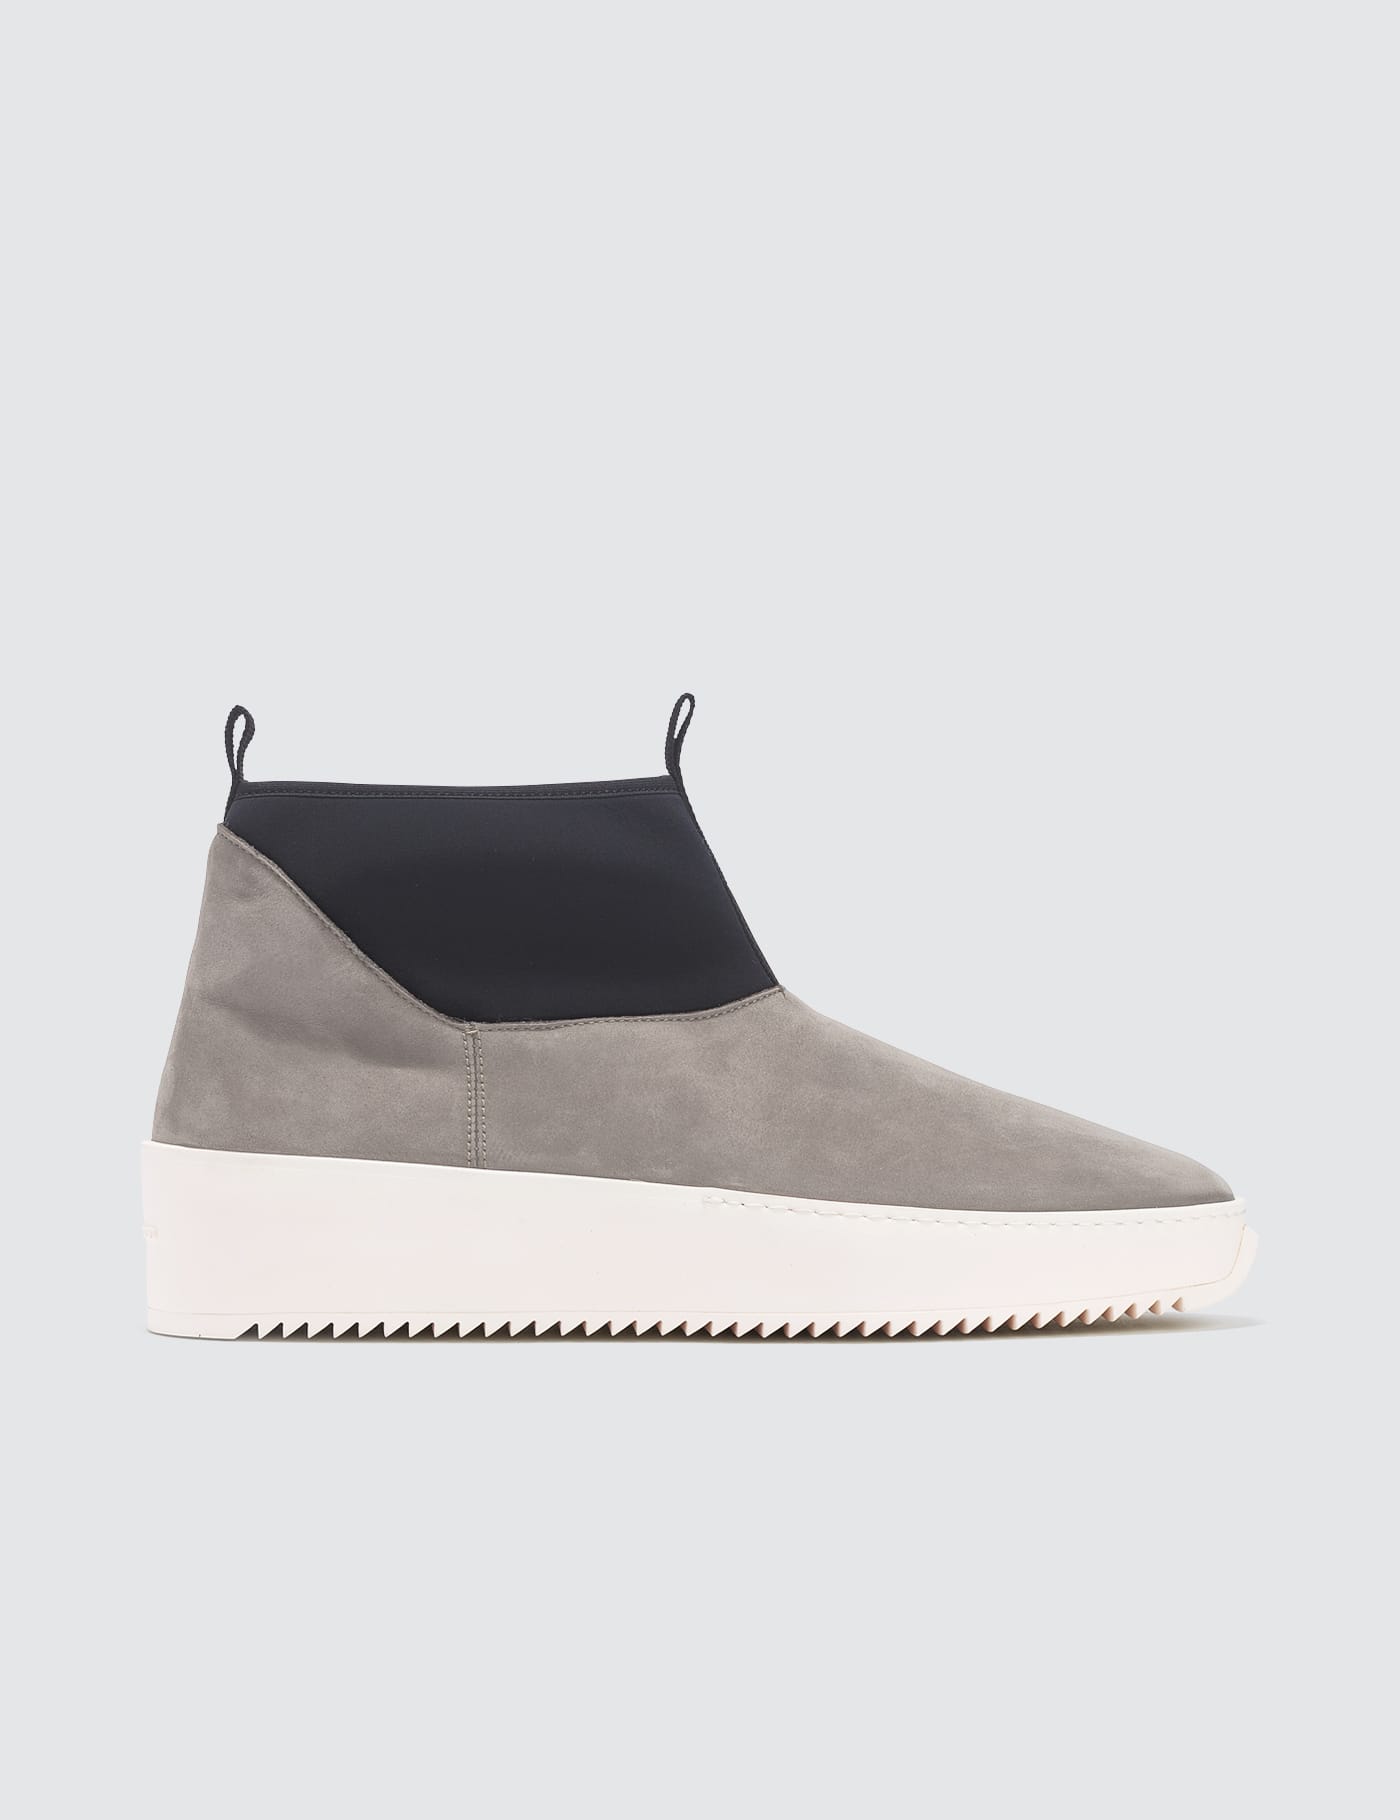 Fear of God - Polar Wolf Boot | HBX - Globally Curated Fashion and